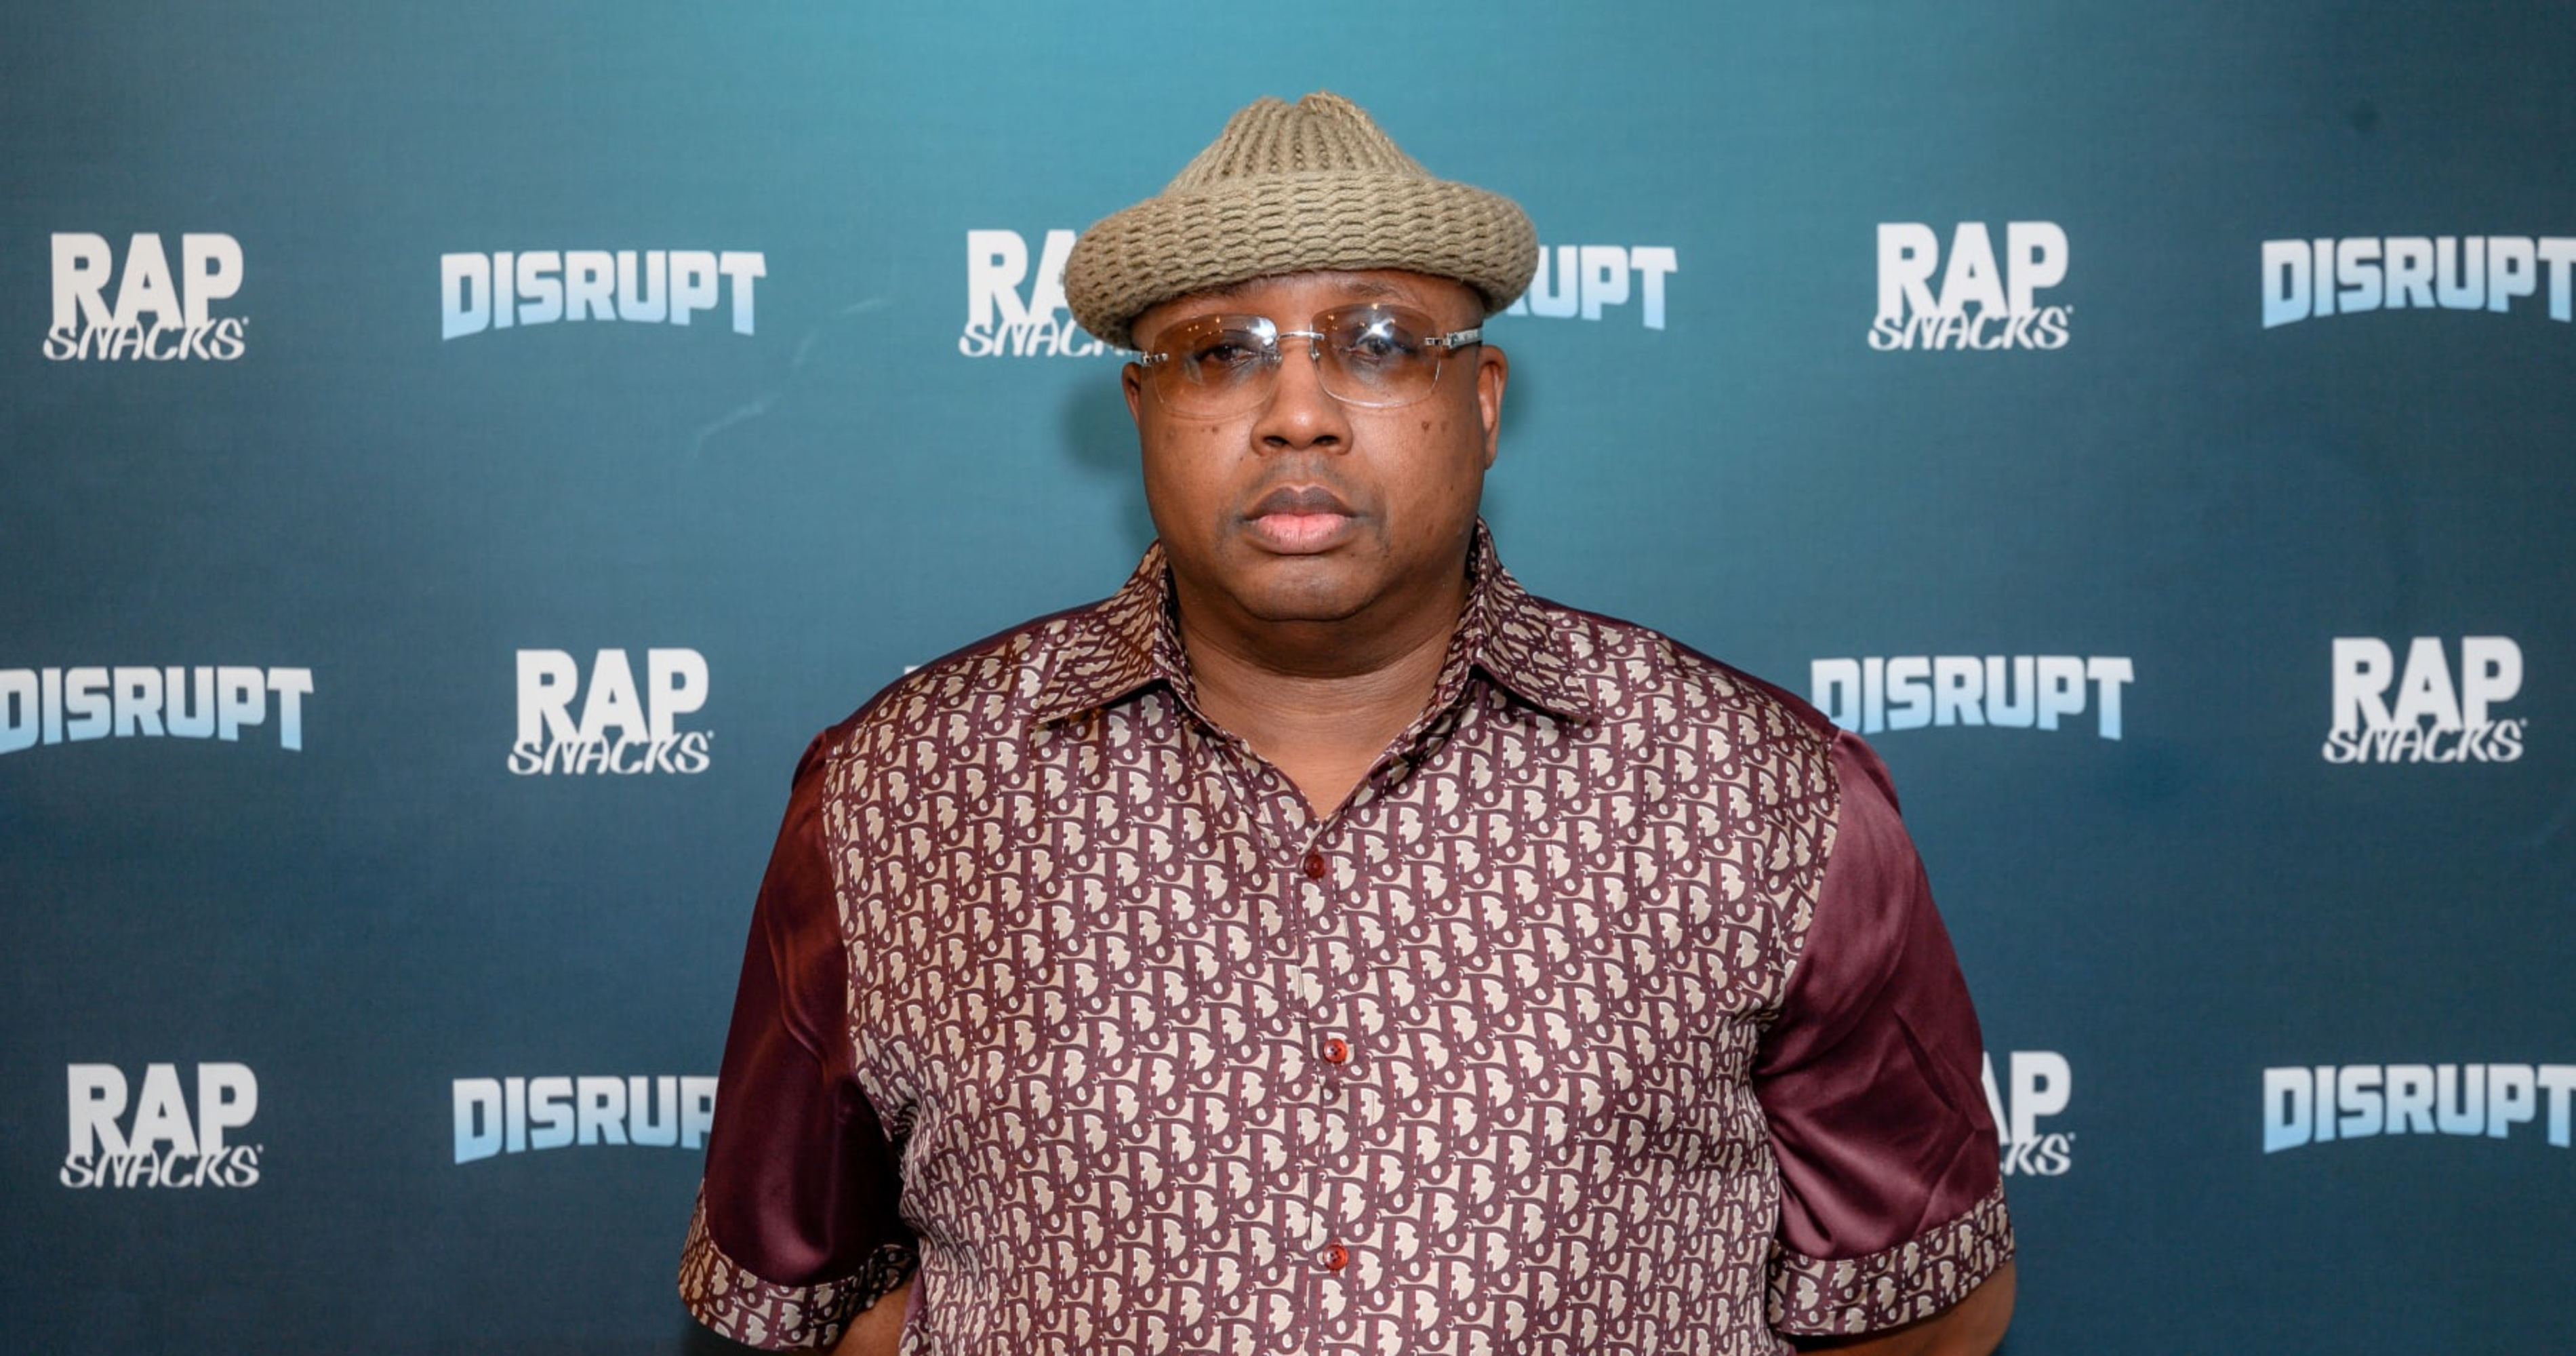 Rap Legend E-40 Says Racial Bias Led to Being Removed from